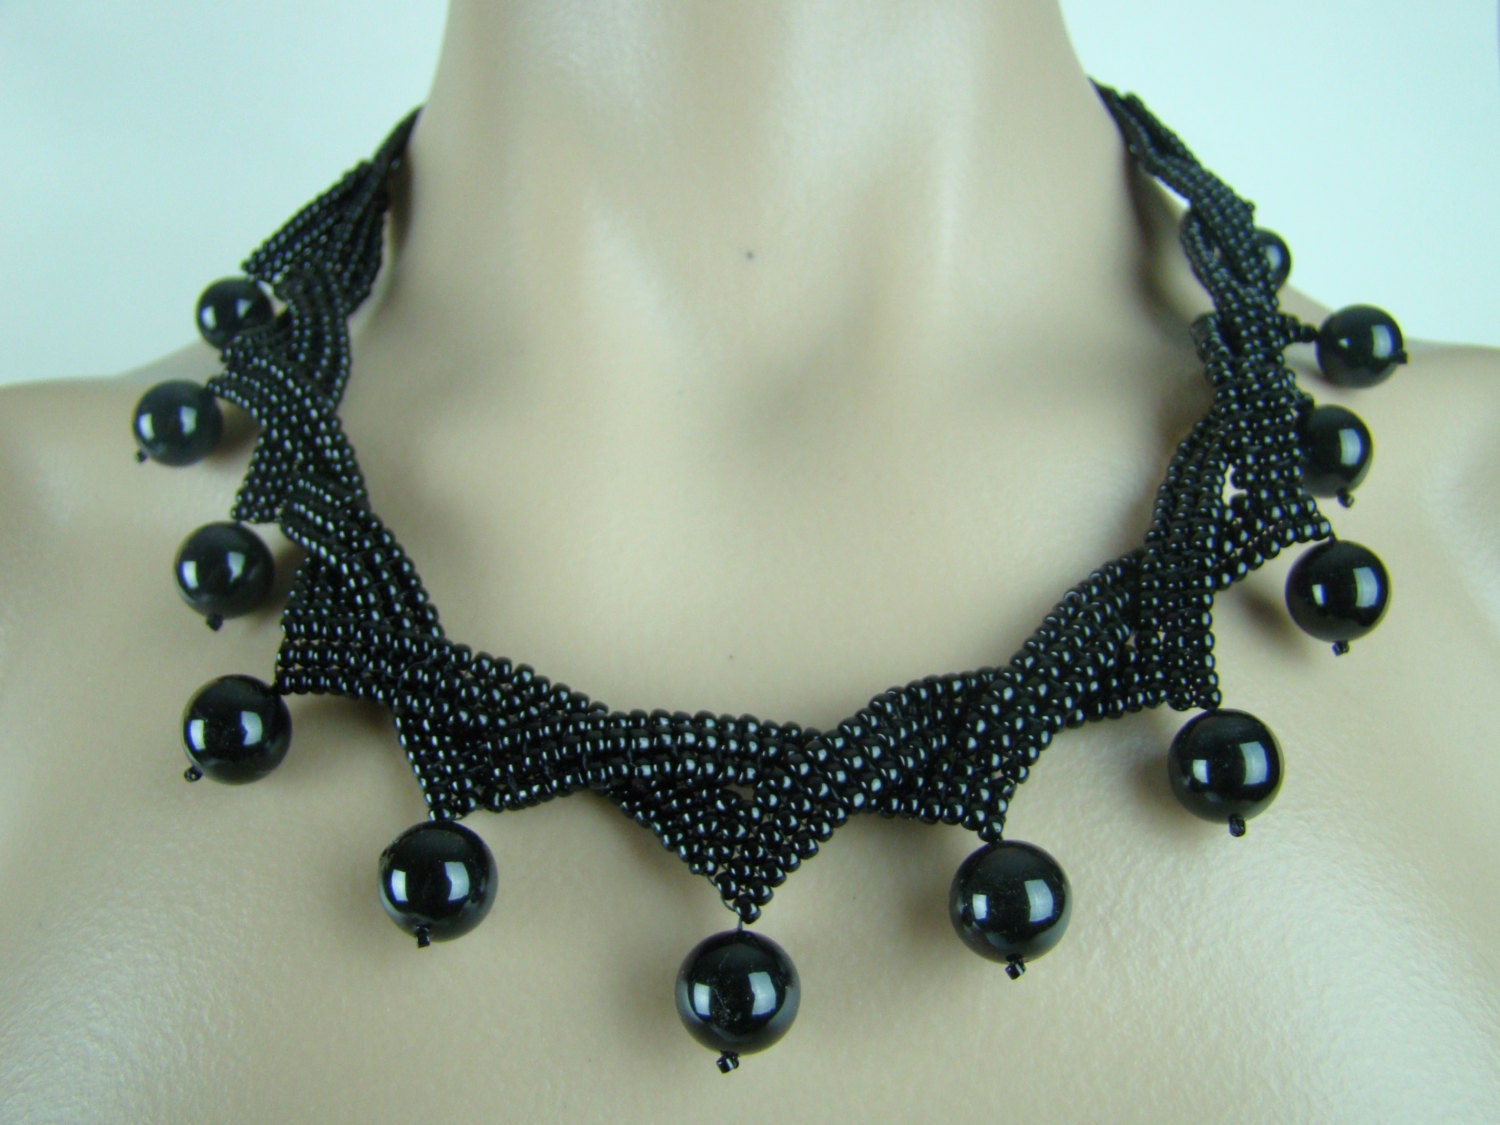 Ribbon and pearl necklace, black  pearl seed beads necklace, fringe pearl necklace, seed beads jewelry, 7PM boutique, weaved necklace